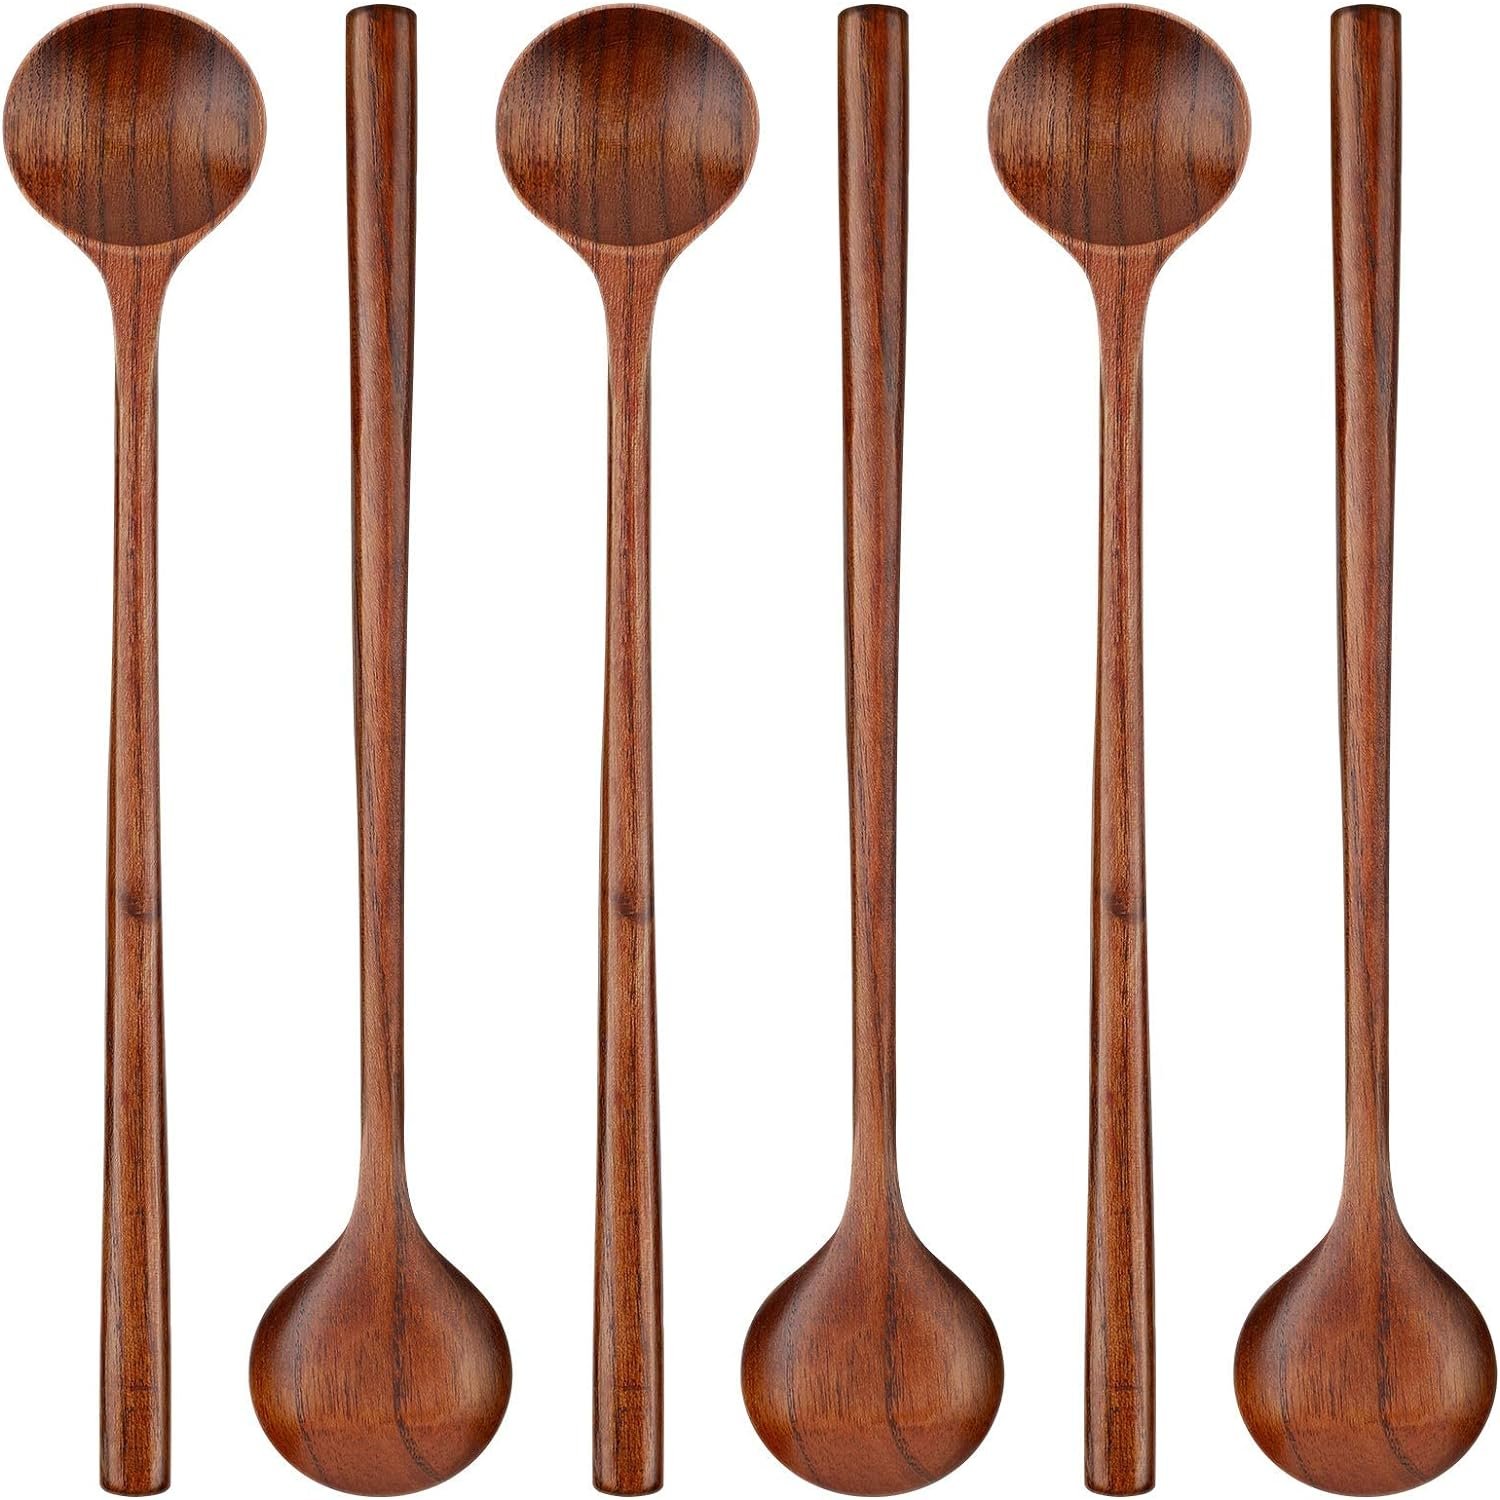 6 Pieces Wooden Long Spoons Long Handle Round Spoons Korean Style Soup Spoons for Soup Cooking Mixing Stirring Kitchen Tools Utensils, 10.9 Inch (Brown)